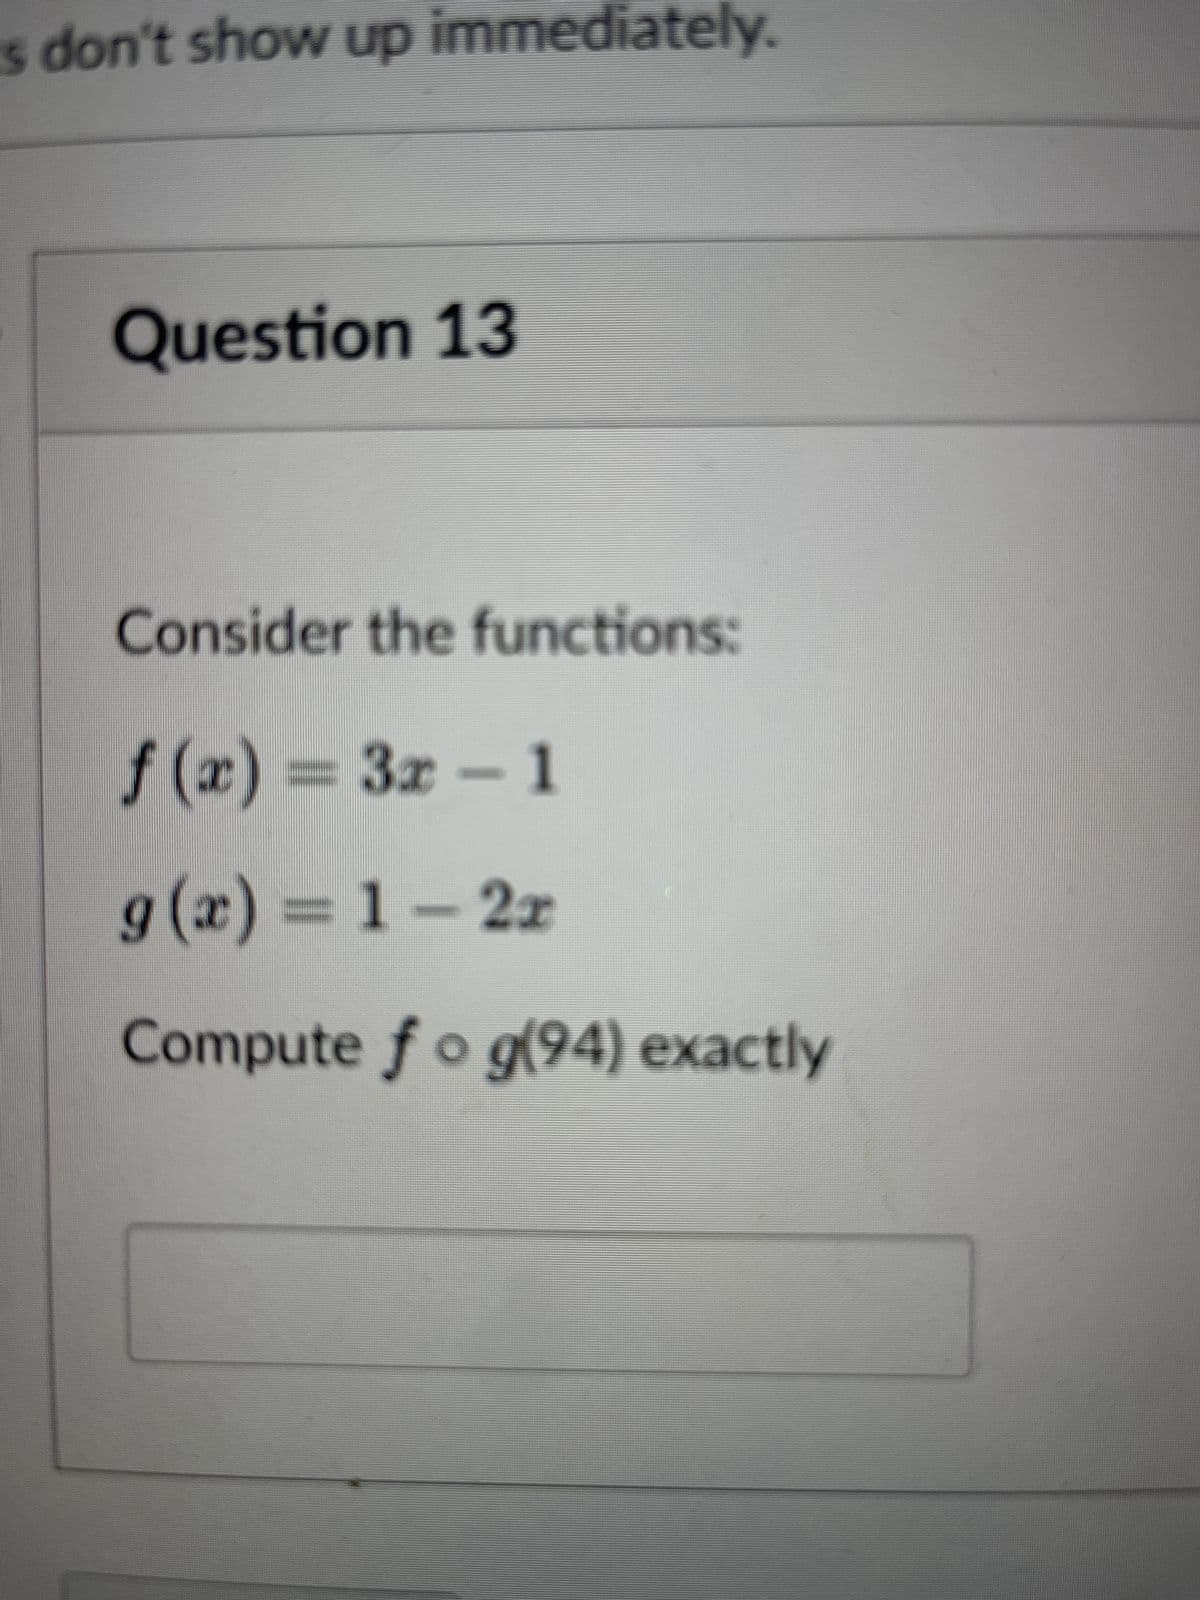 s don't show up immediately.
Question 13
Consider the functions:
f(x) = 3x - 1
g(x) = 1-2r
Compute fo g(94) exactly